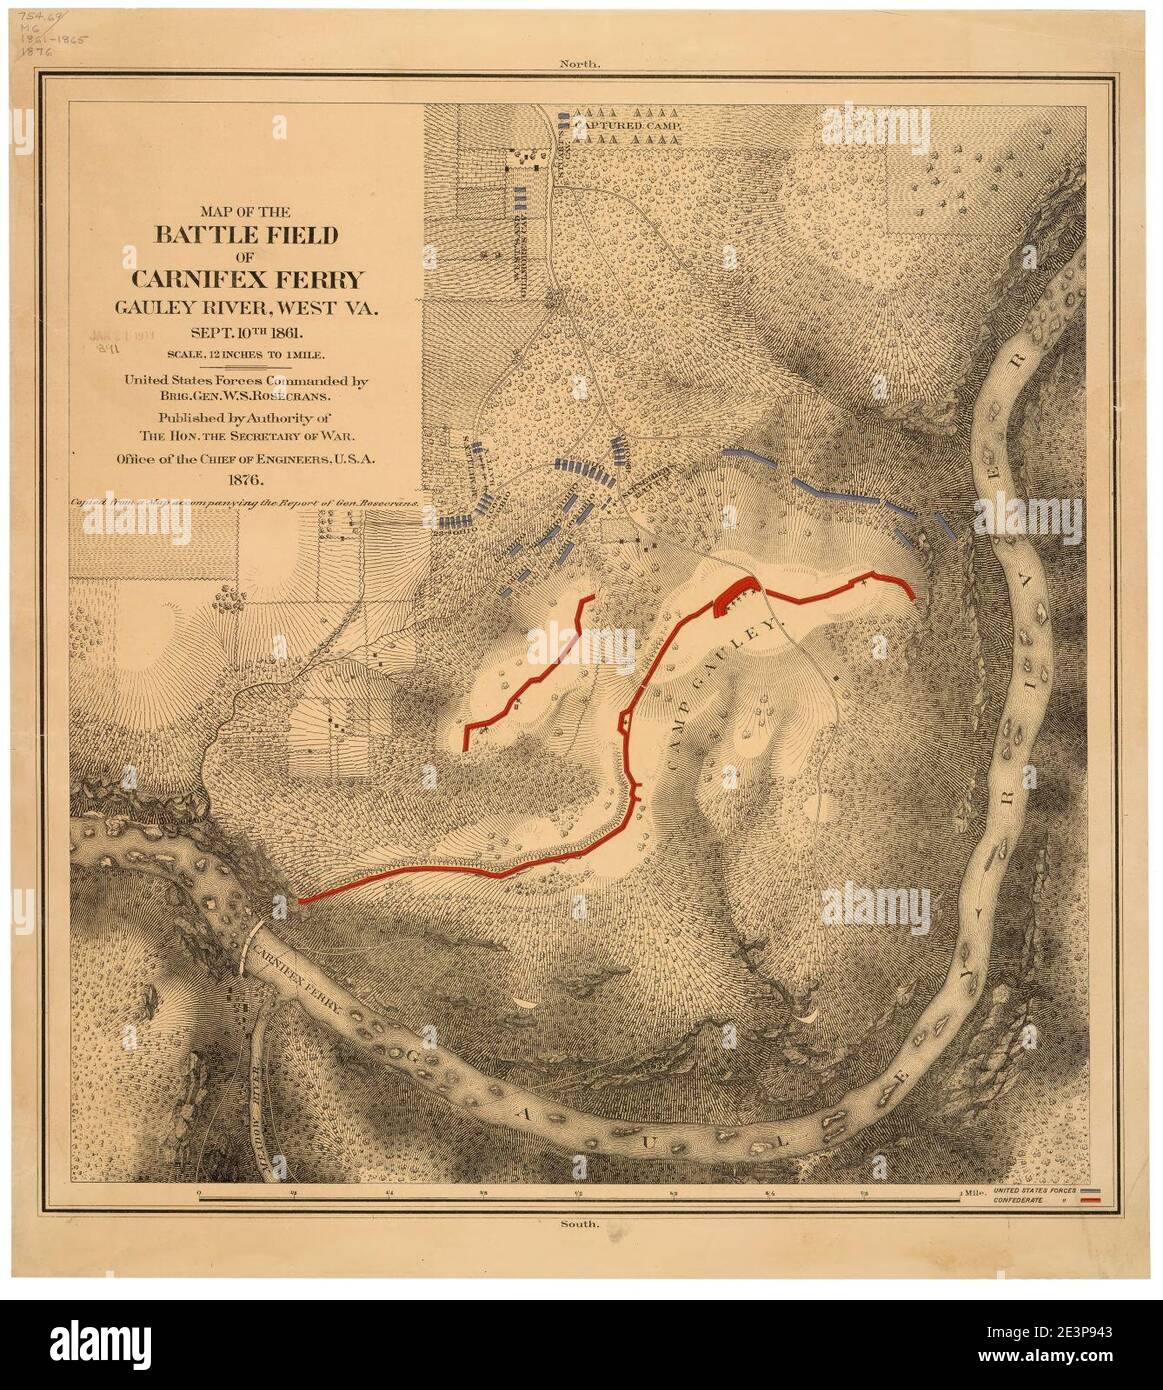 Map of the battle field of Carnifex Ferry, Gauley River, West Va., Sept. 10th 1861 - United States forces commanded by Brig. Gen. W.S. Rosecrans. Stock Photo